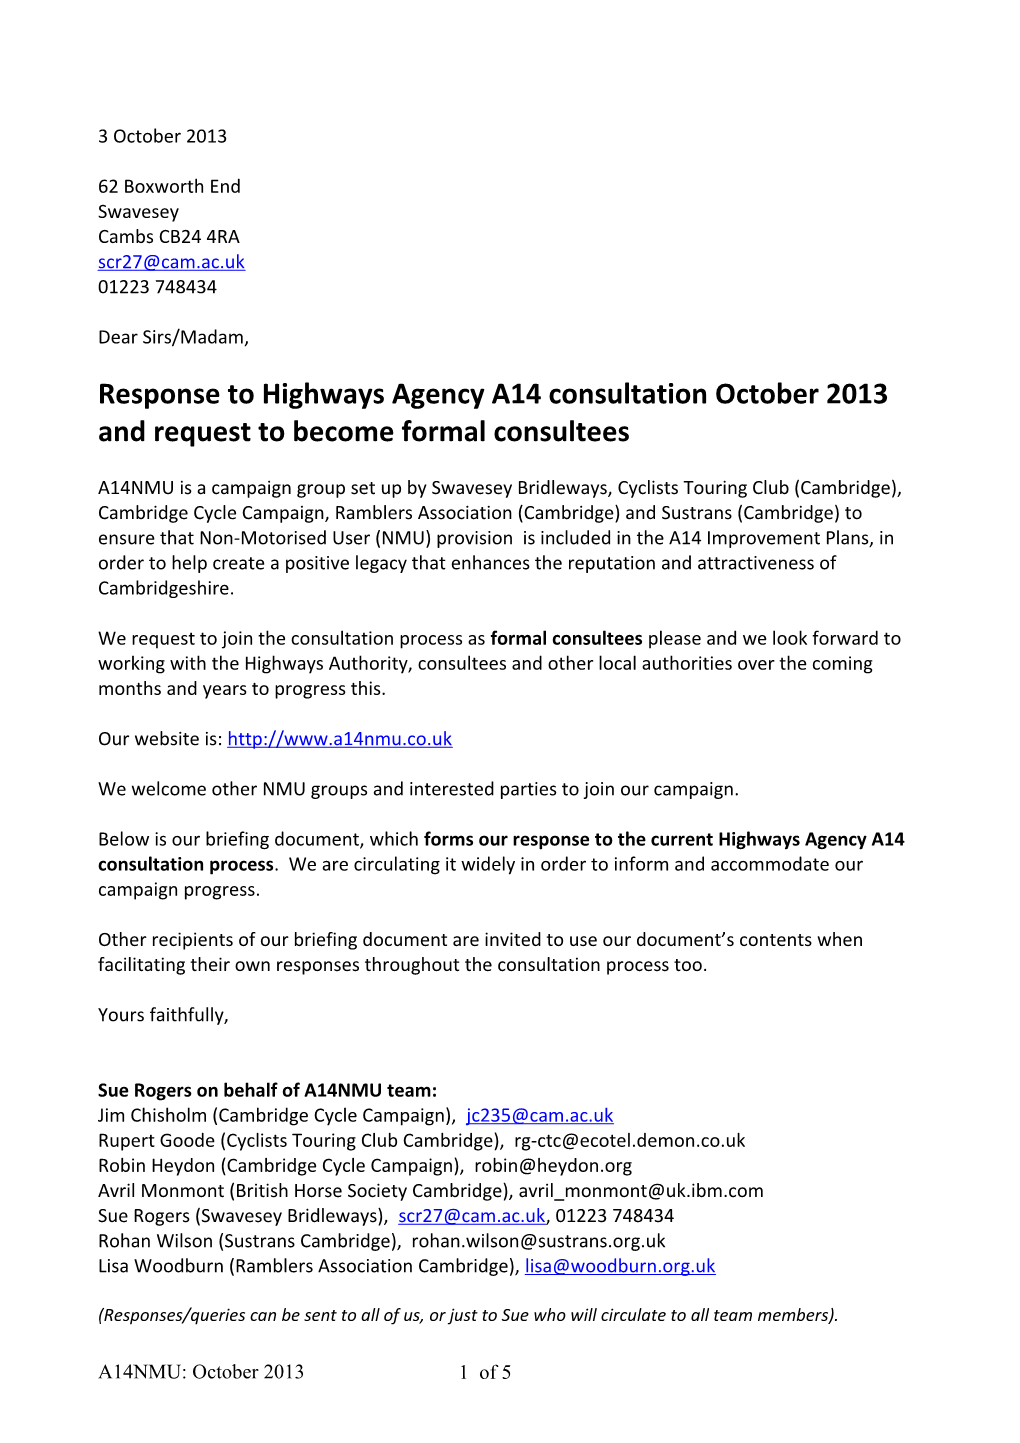 Response to Highways Agency A14 Consultation October 2013 and Request to Become Formal